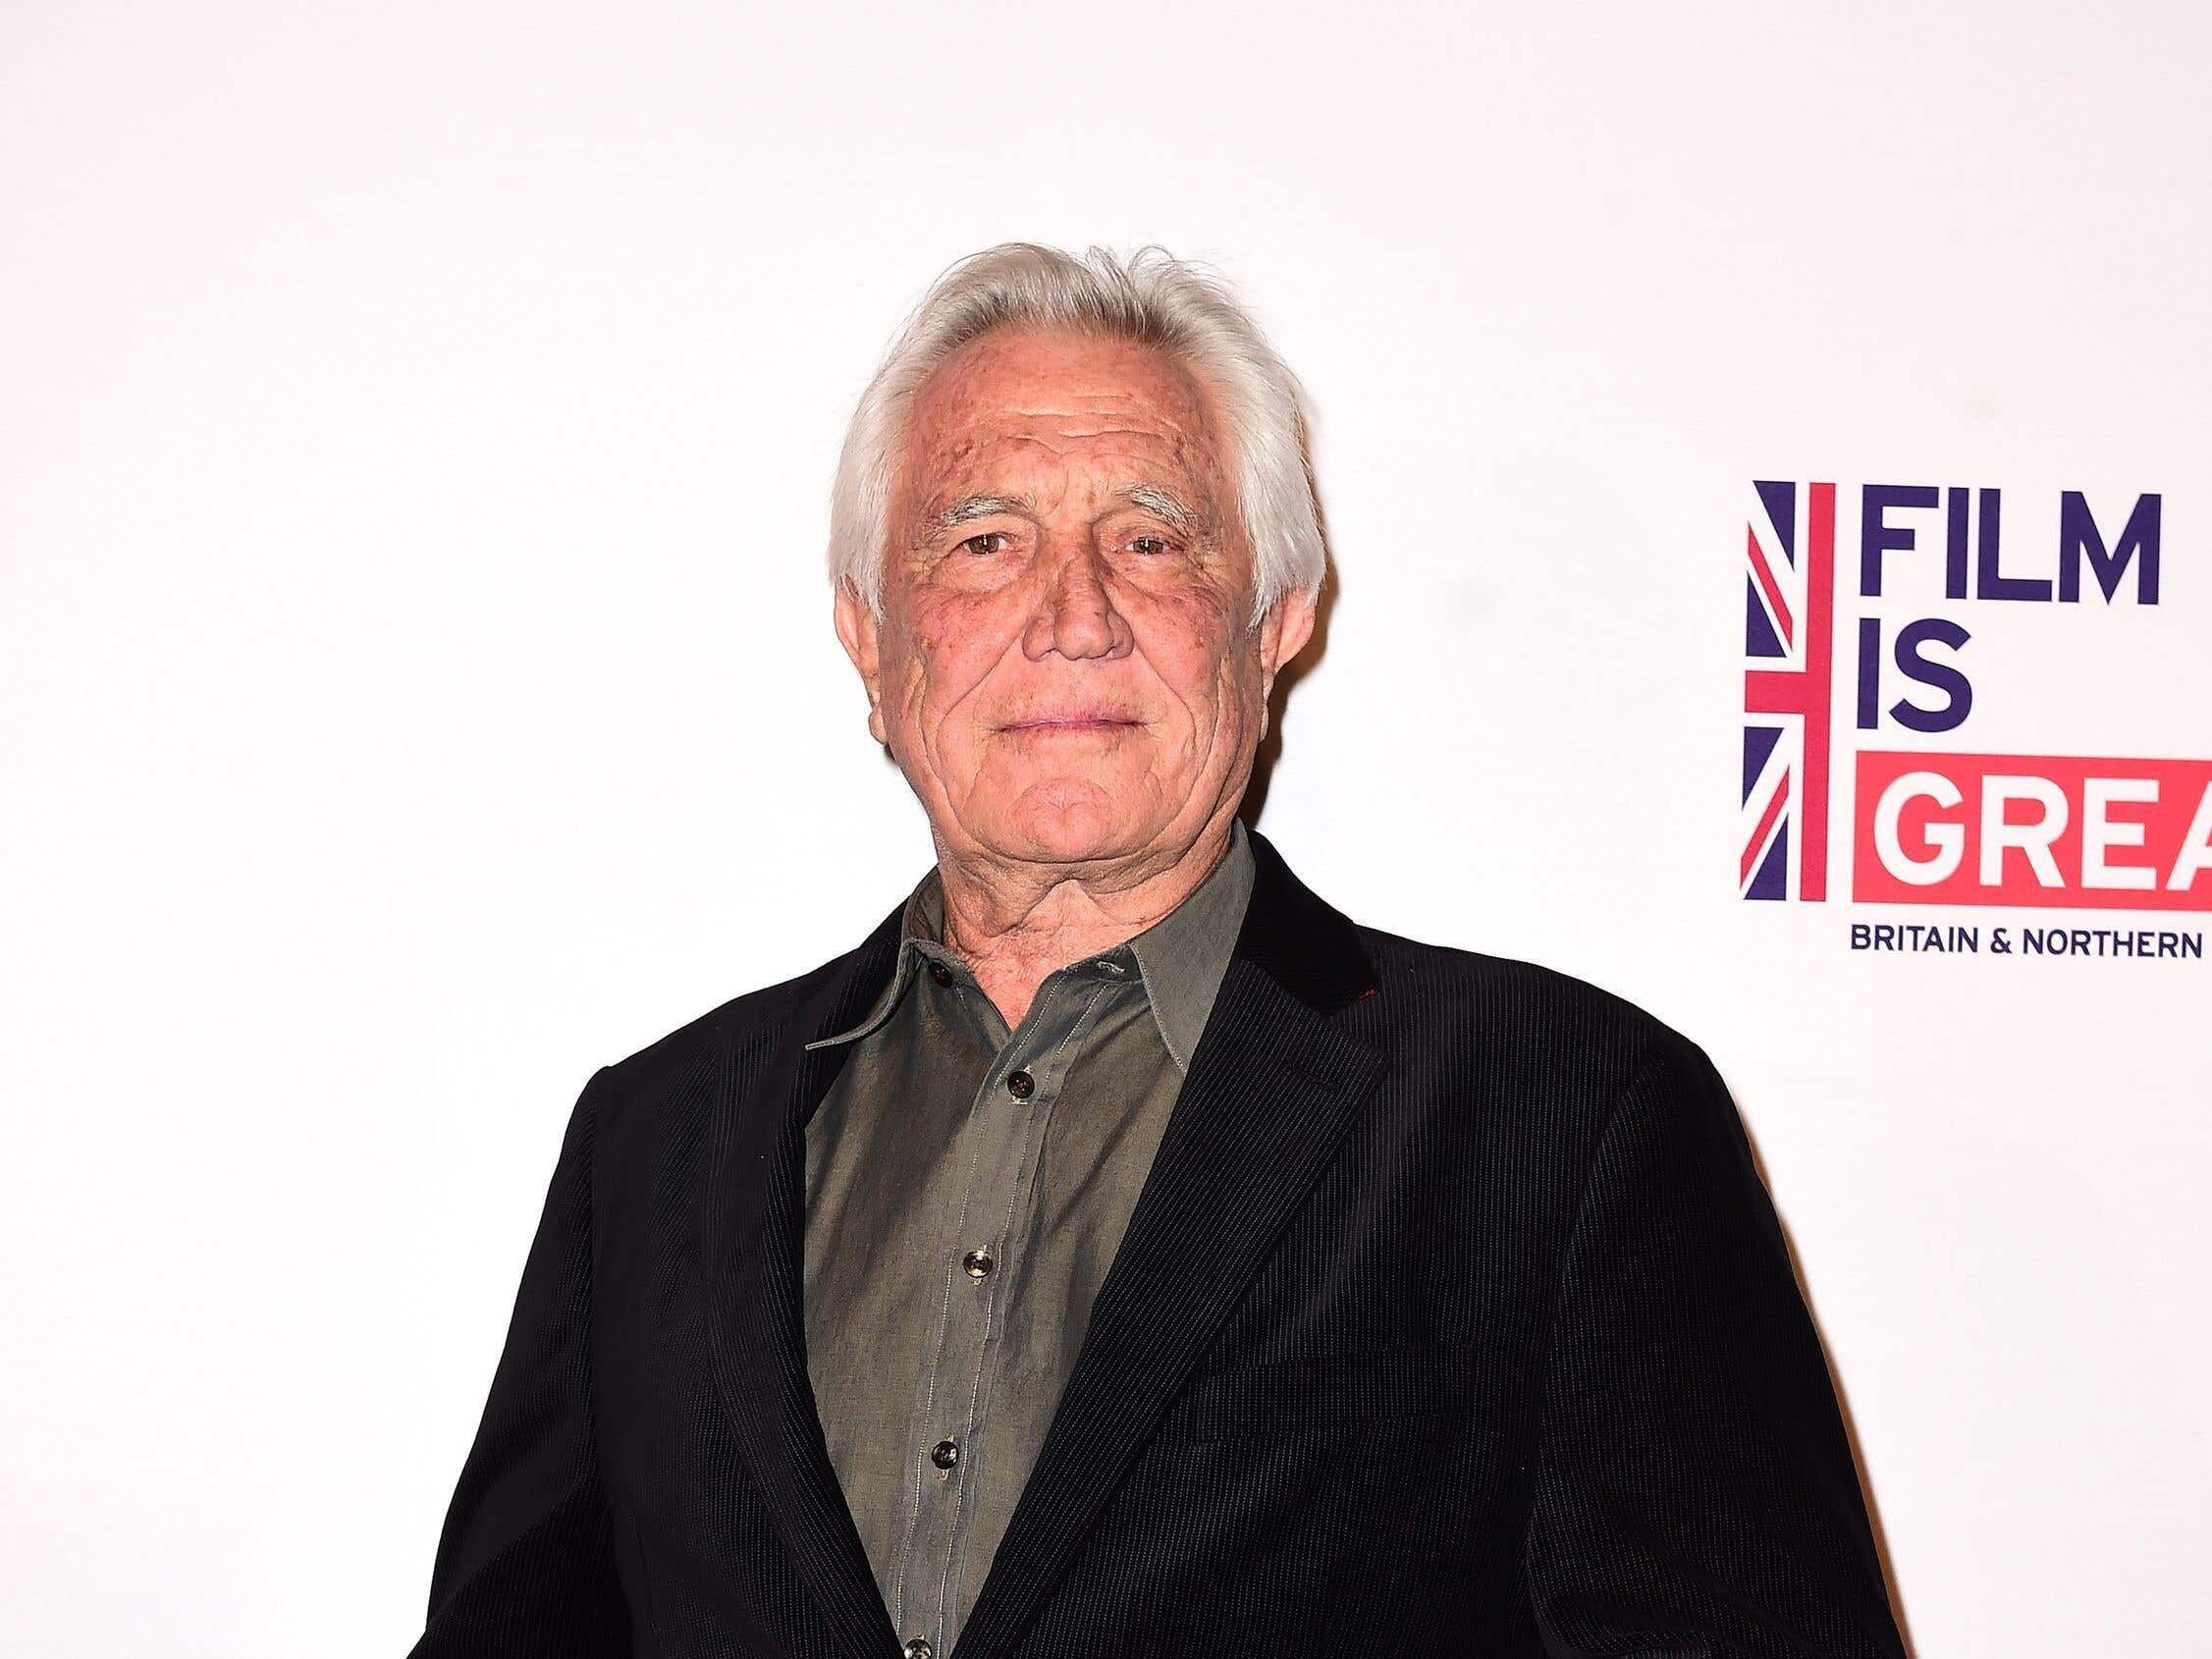 James Bond star George Lazenby retires from acting after ‘a fun ride’